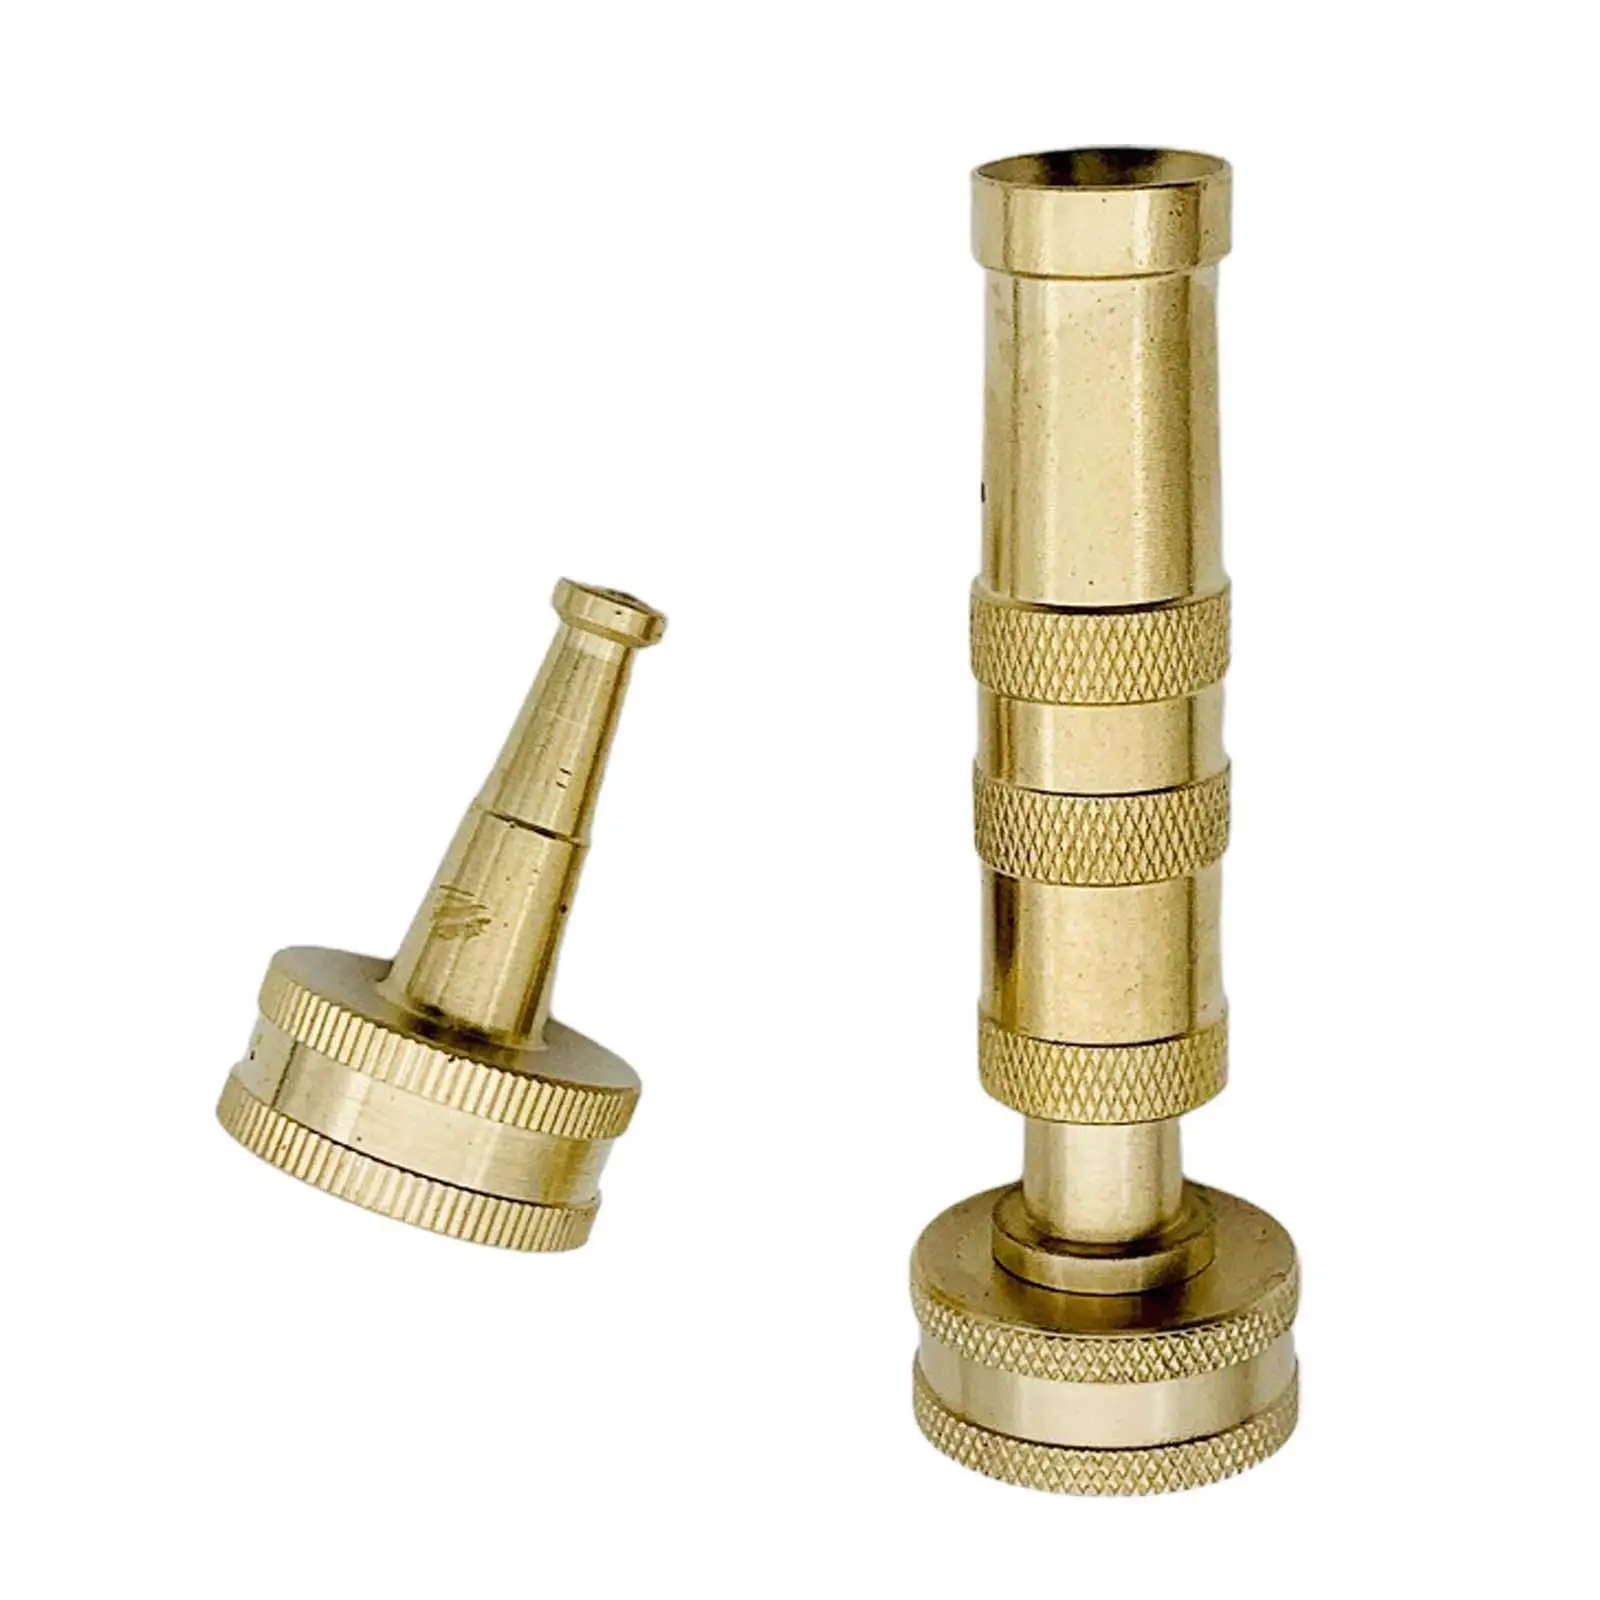 Solid Brass Hose Nozzle Pressure Spray Attachment for Garden Metal Twist Hose Nozzle for Flower Yard Plants House Watering